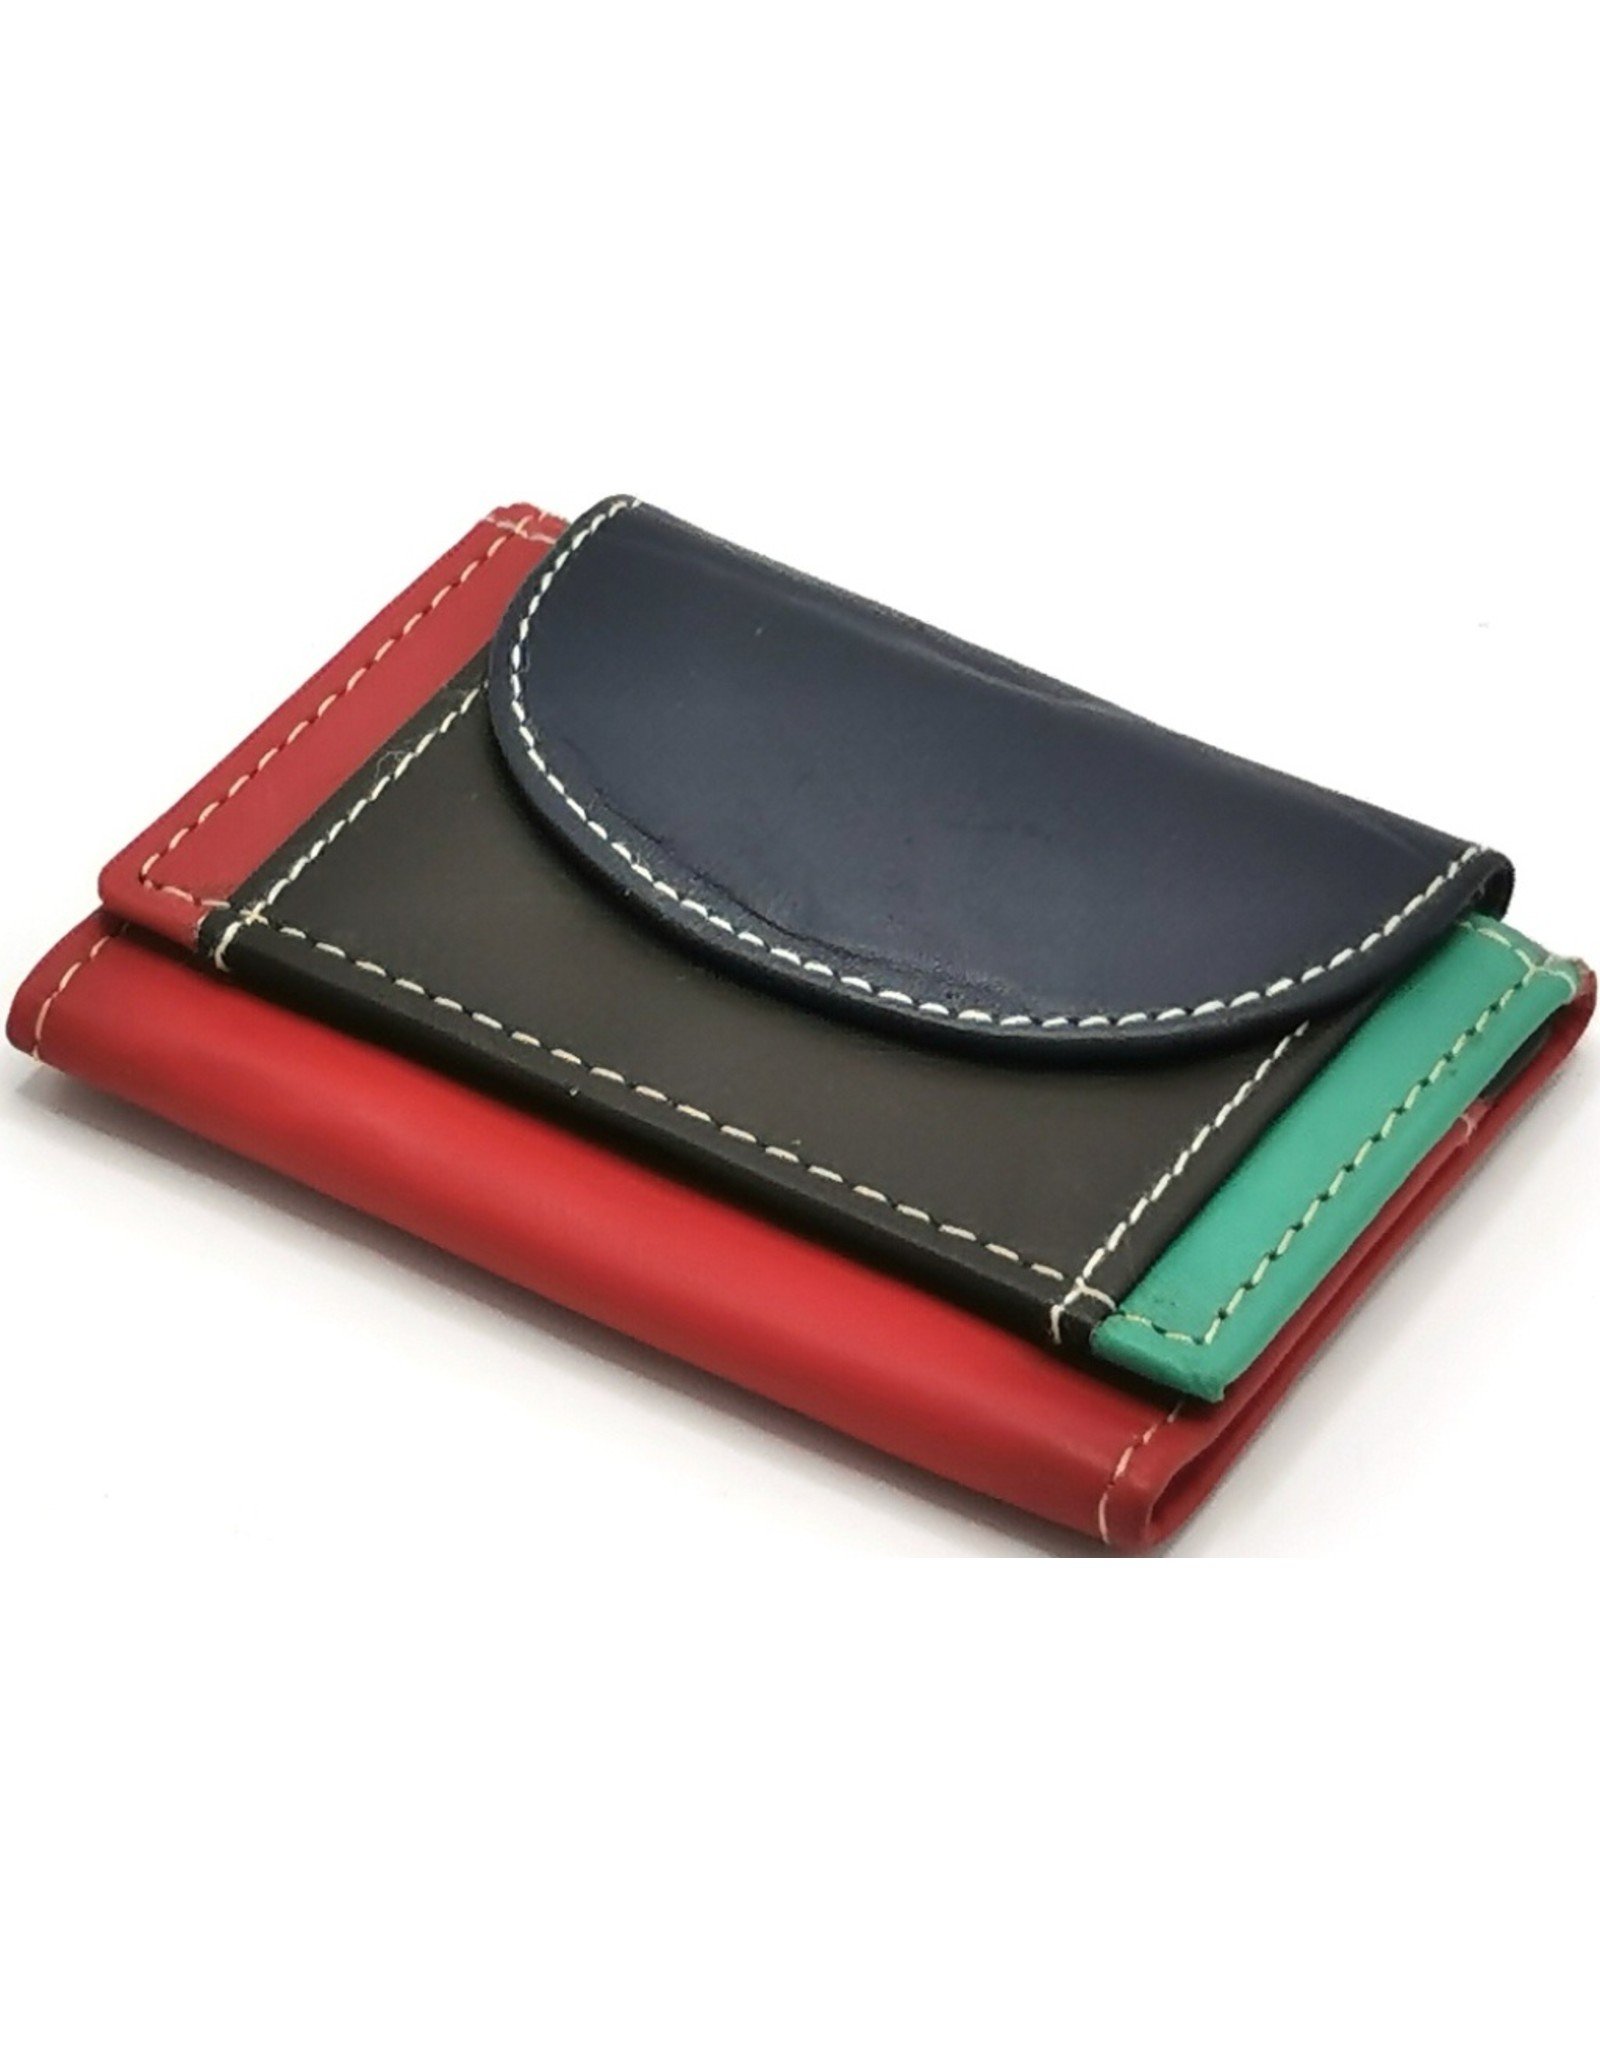 Hutmann Leather Wallets -  Leather mini wallet in colored leather